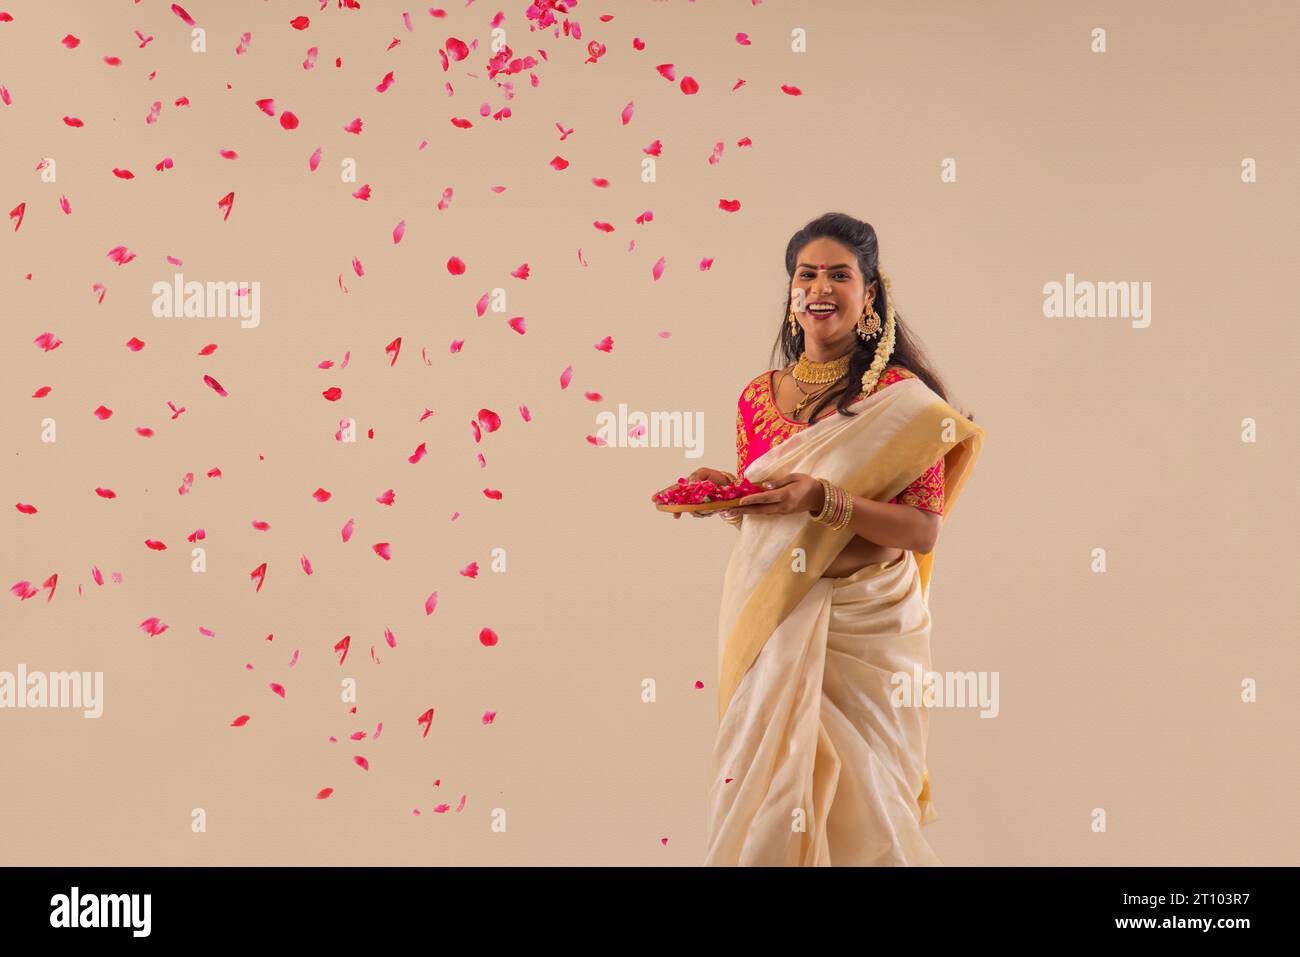 Smiling woman in traditional clothing holding a plate of rose petals against pain background Stock Photo